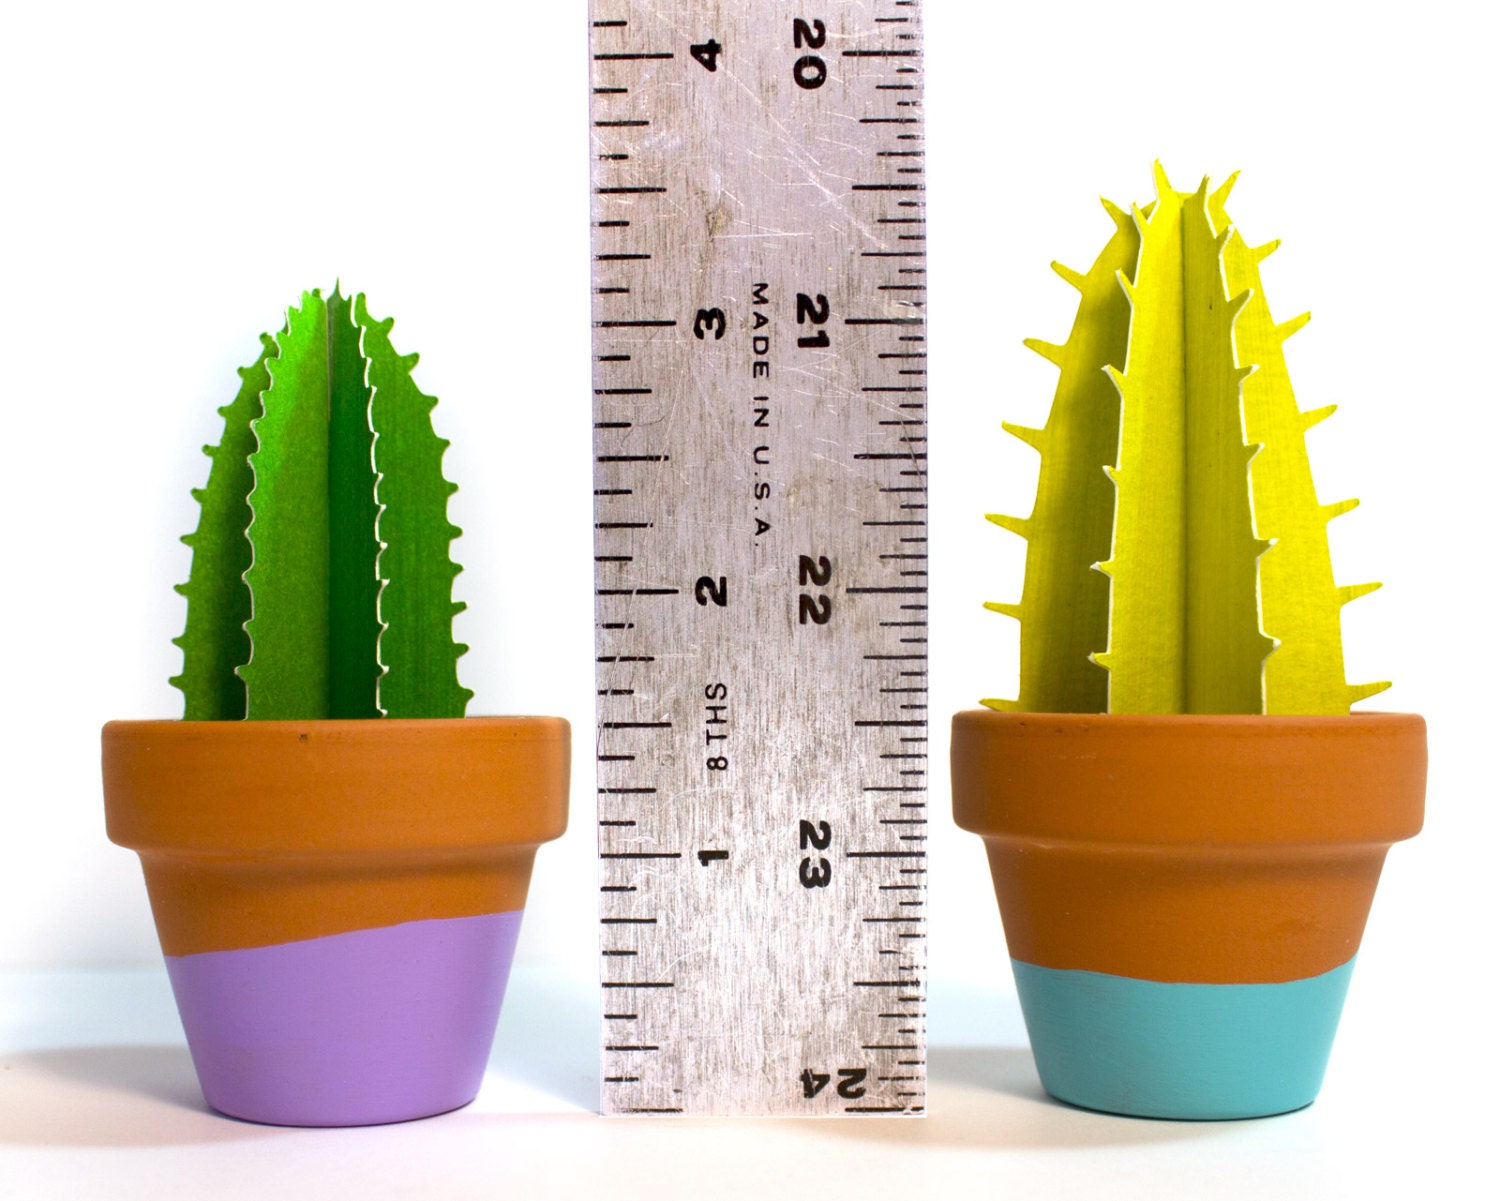 Cute single spiky 3D paper cacti in terracotta pots with a ruler showing height of about 3.5" inches.